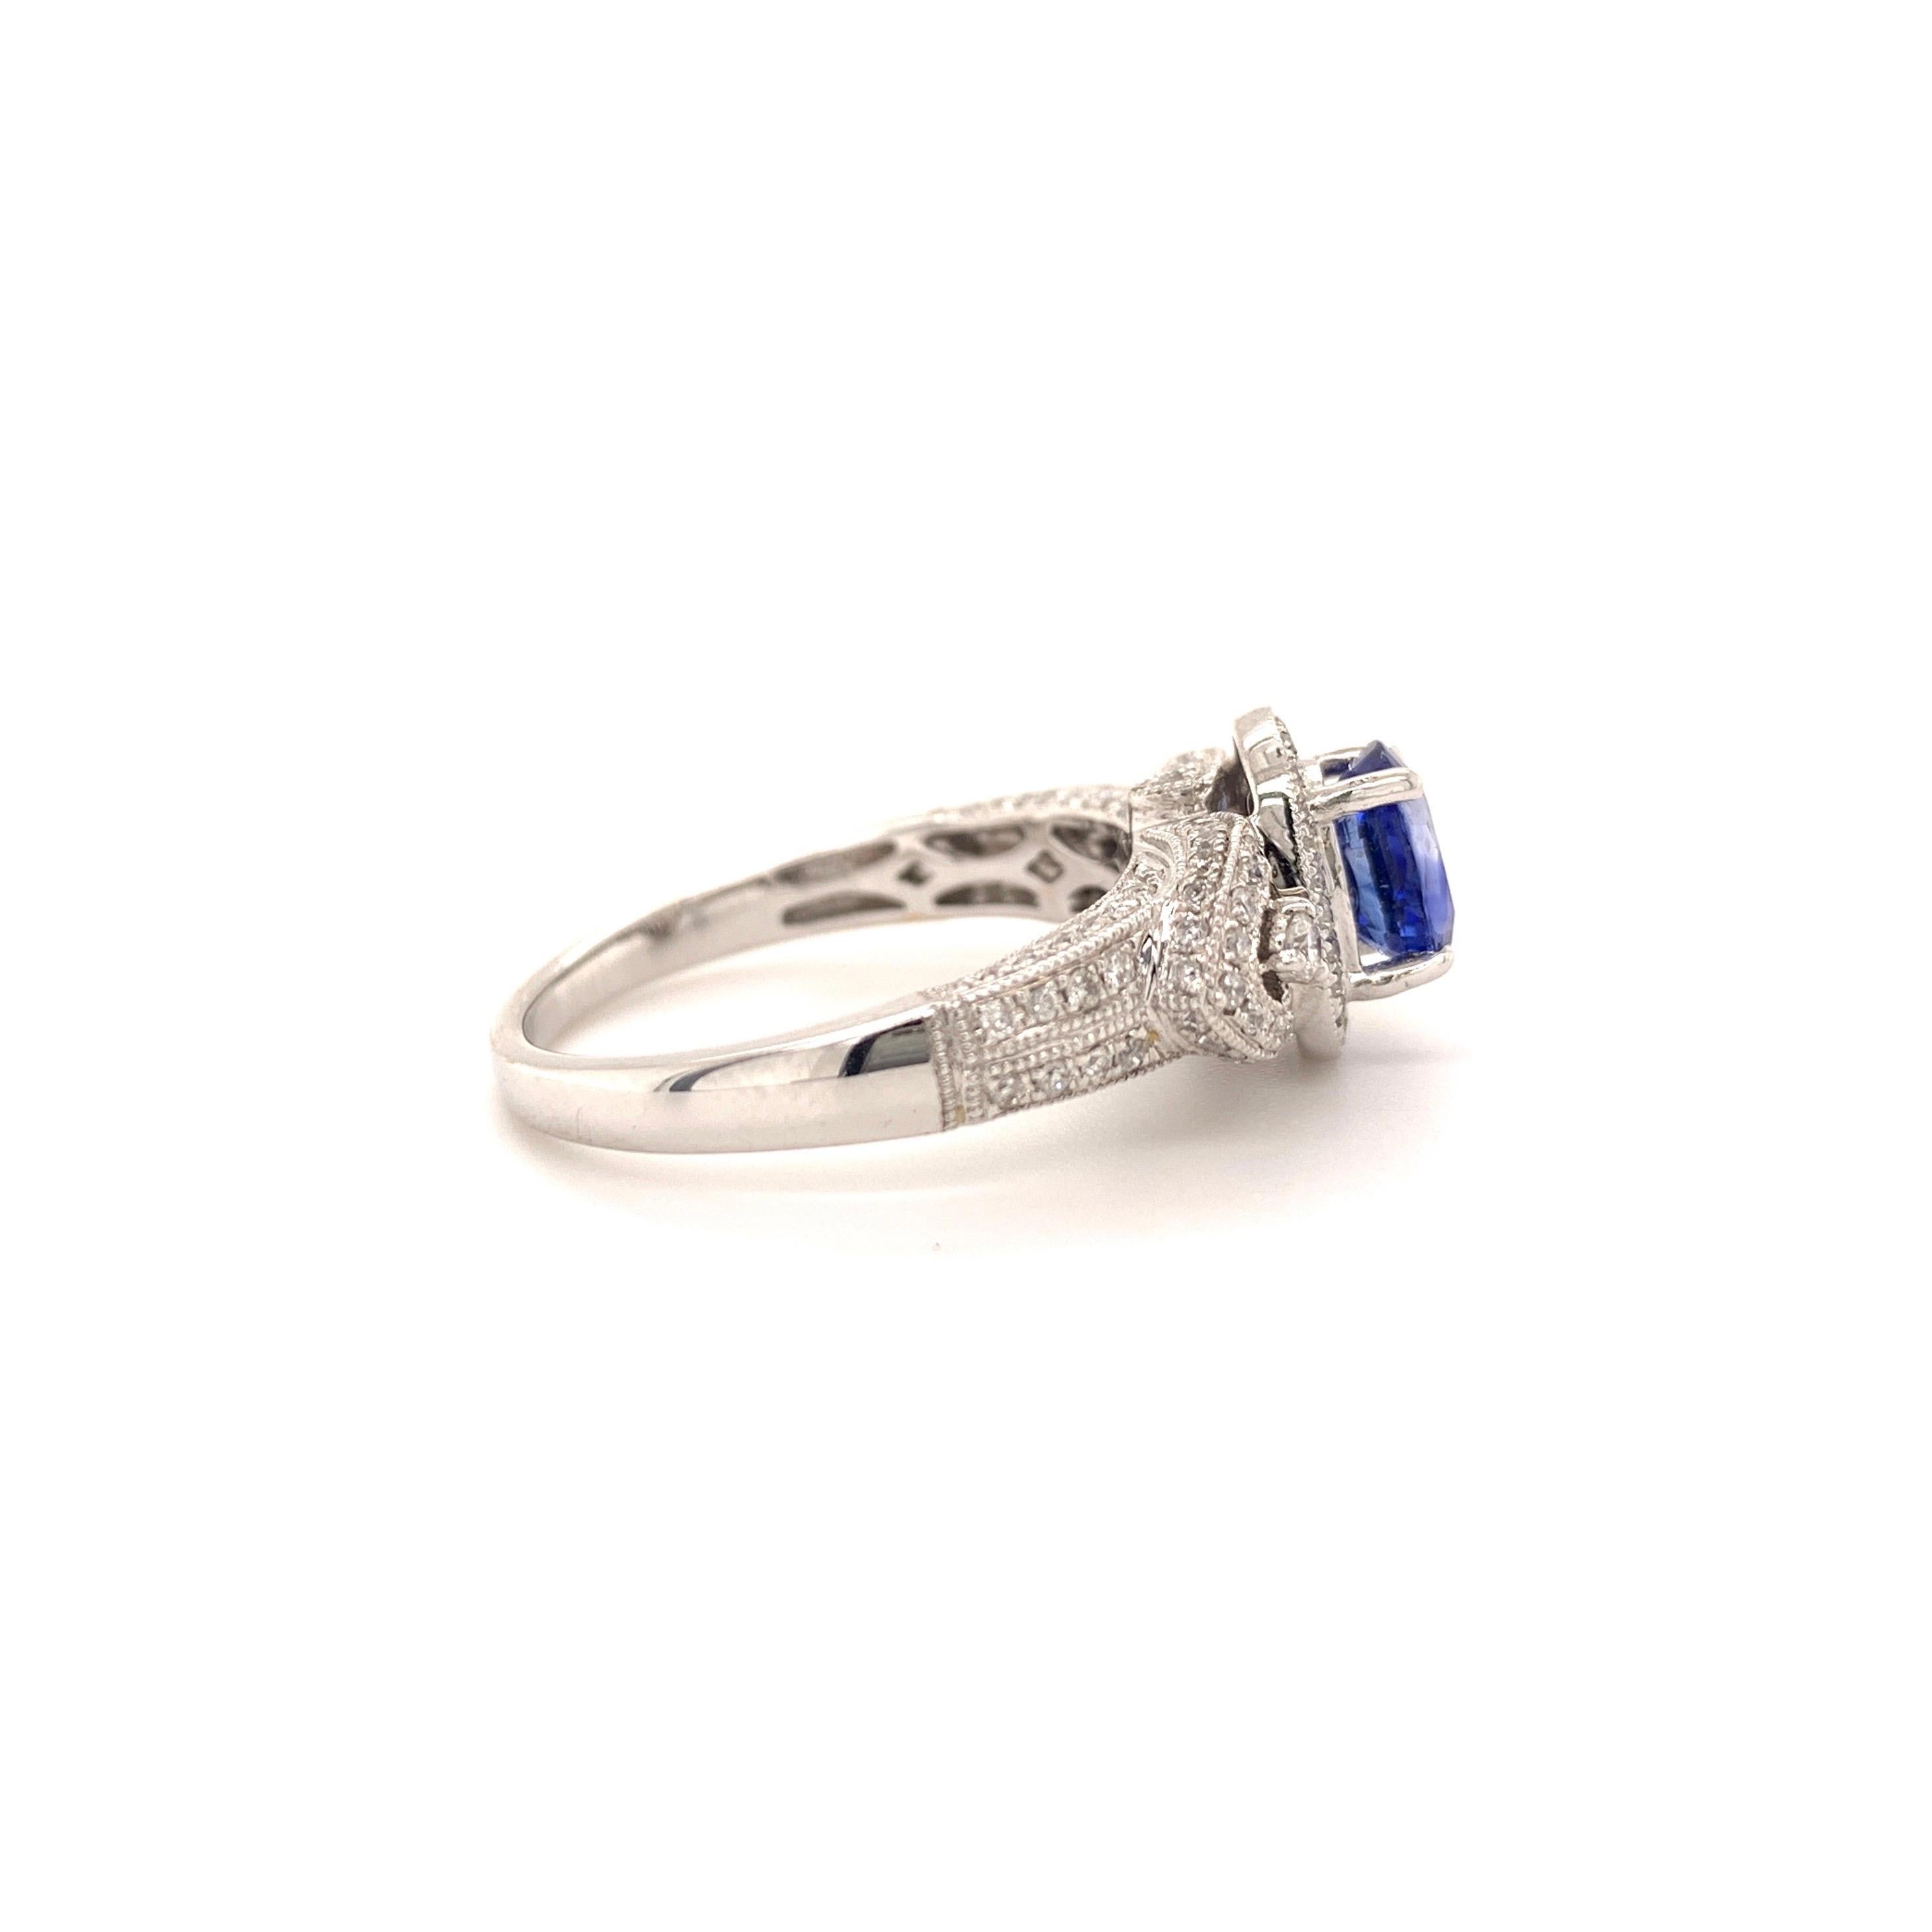 Elegant sapphire diamond ring. sparkling, oval faceted, lively blue 0.93-carat natural sapphire mounted in high profile basket with four bead prongs, accented with round brilliant cut diamonds. Handcrafted design set in high polished 14 karats white